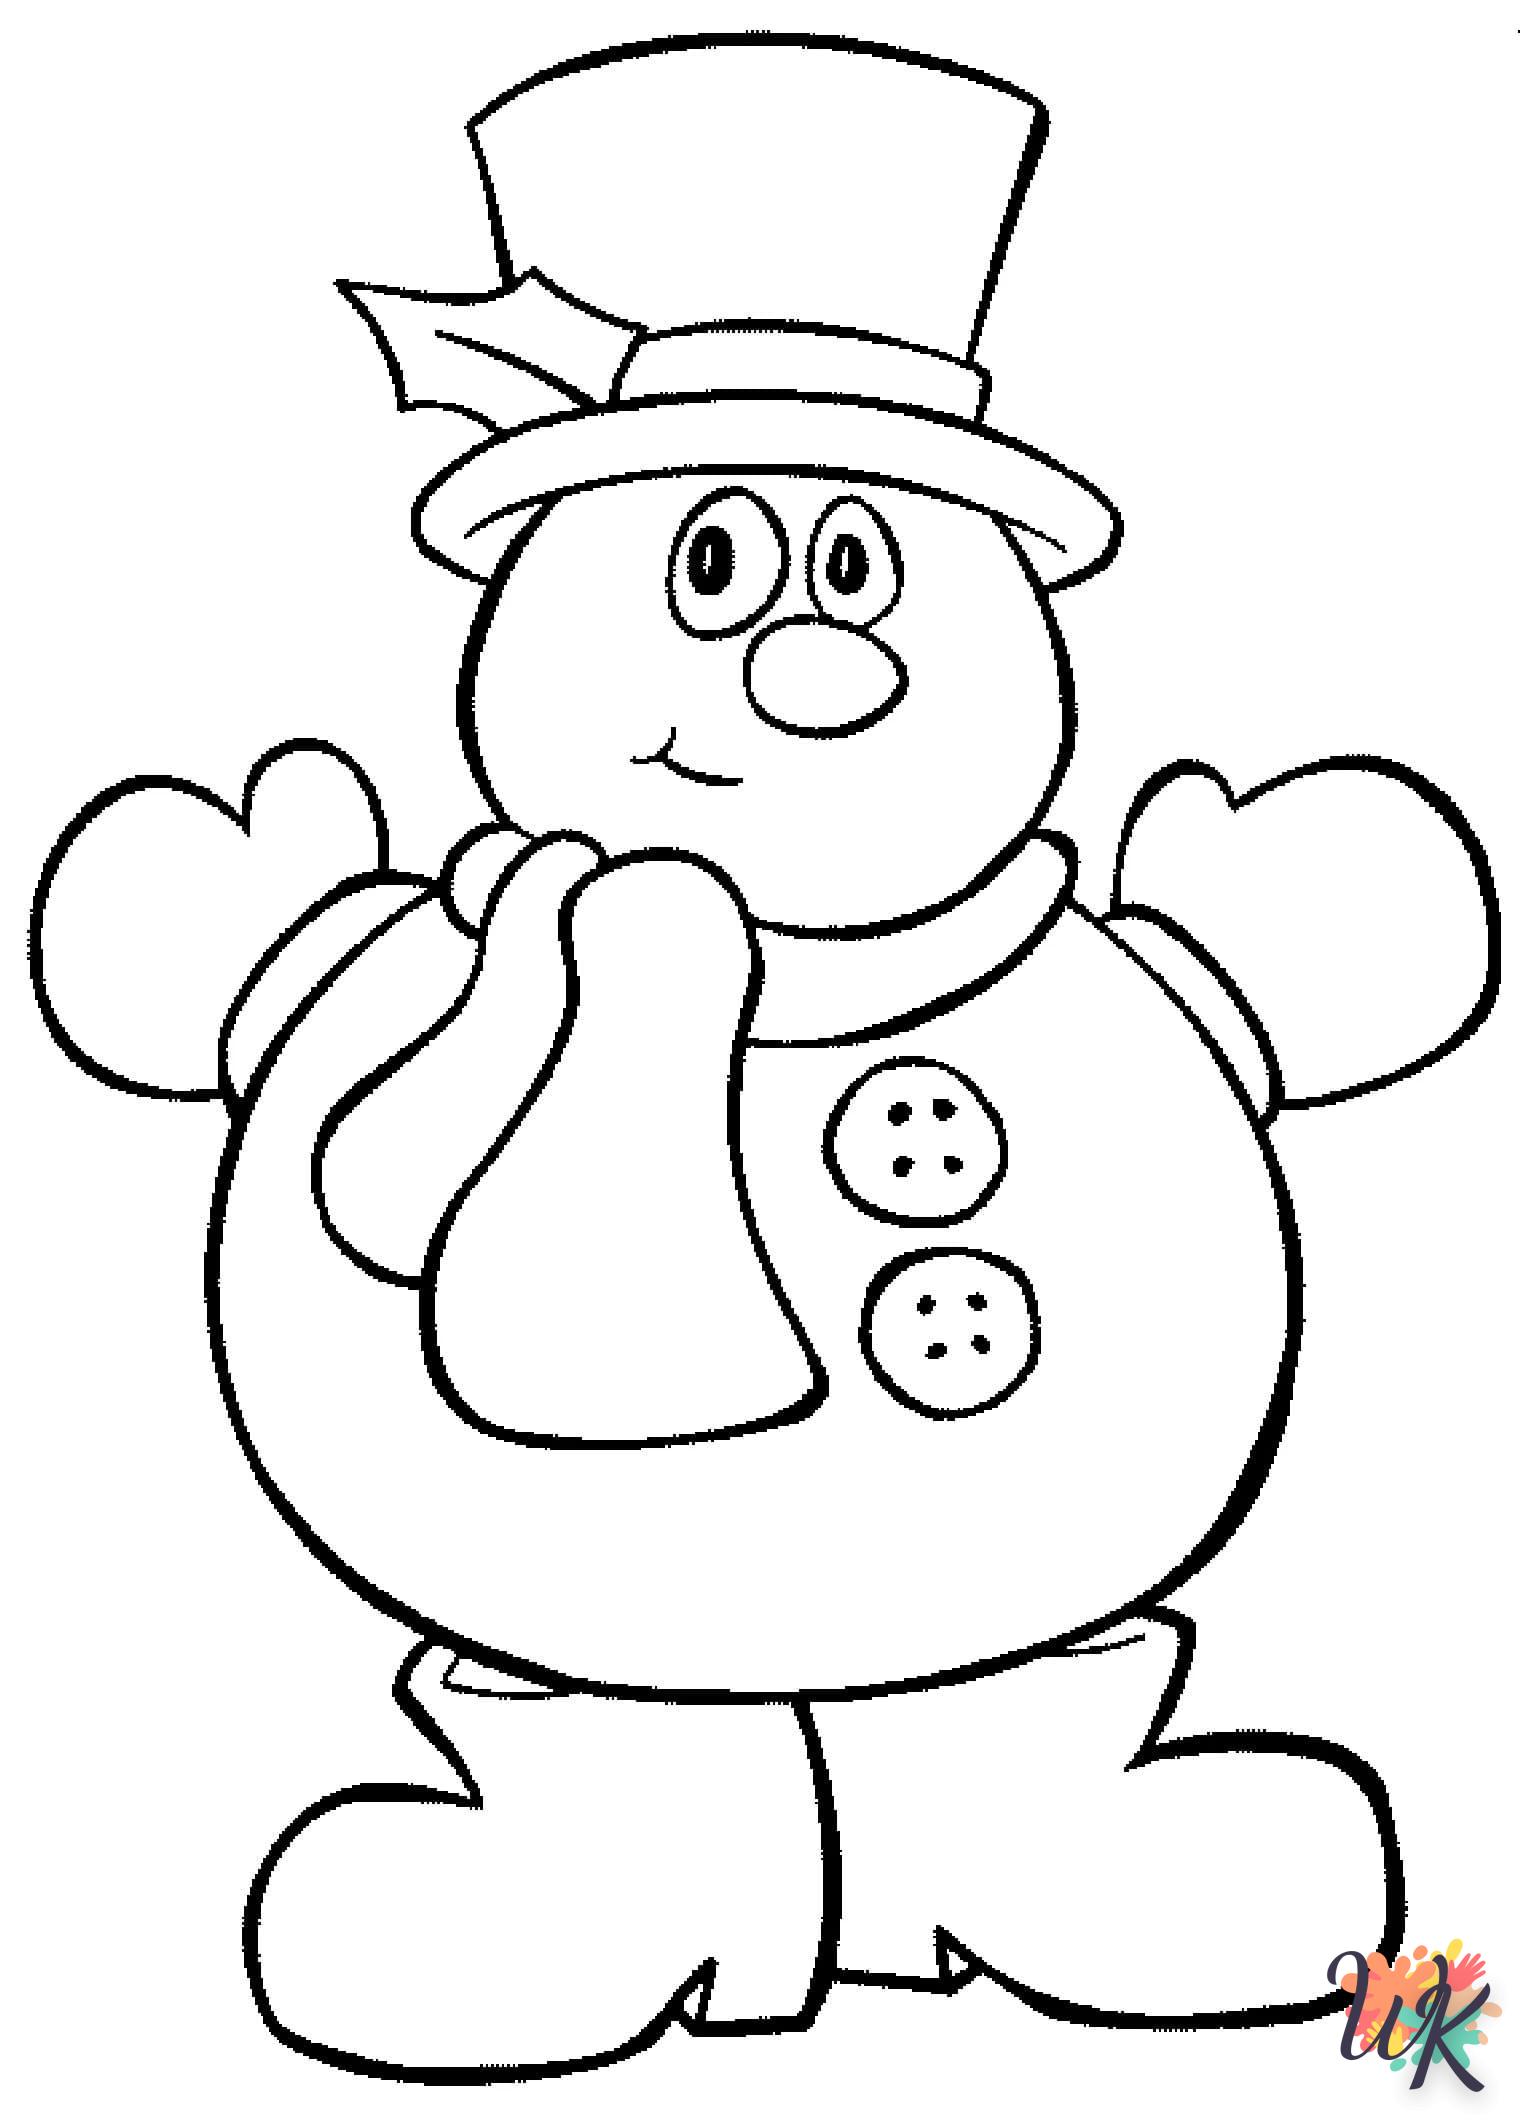 Snowman coloring and cutting to print free